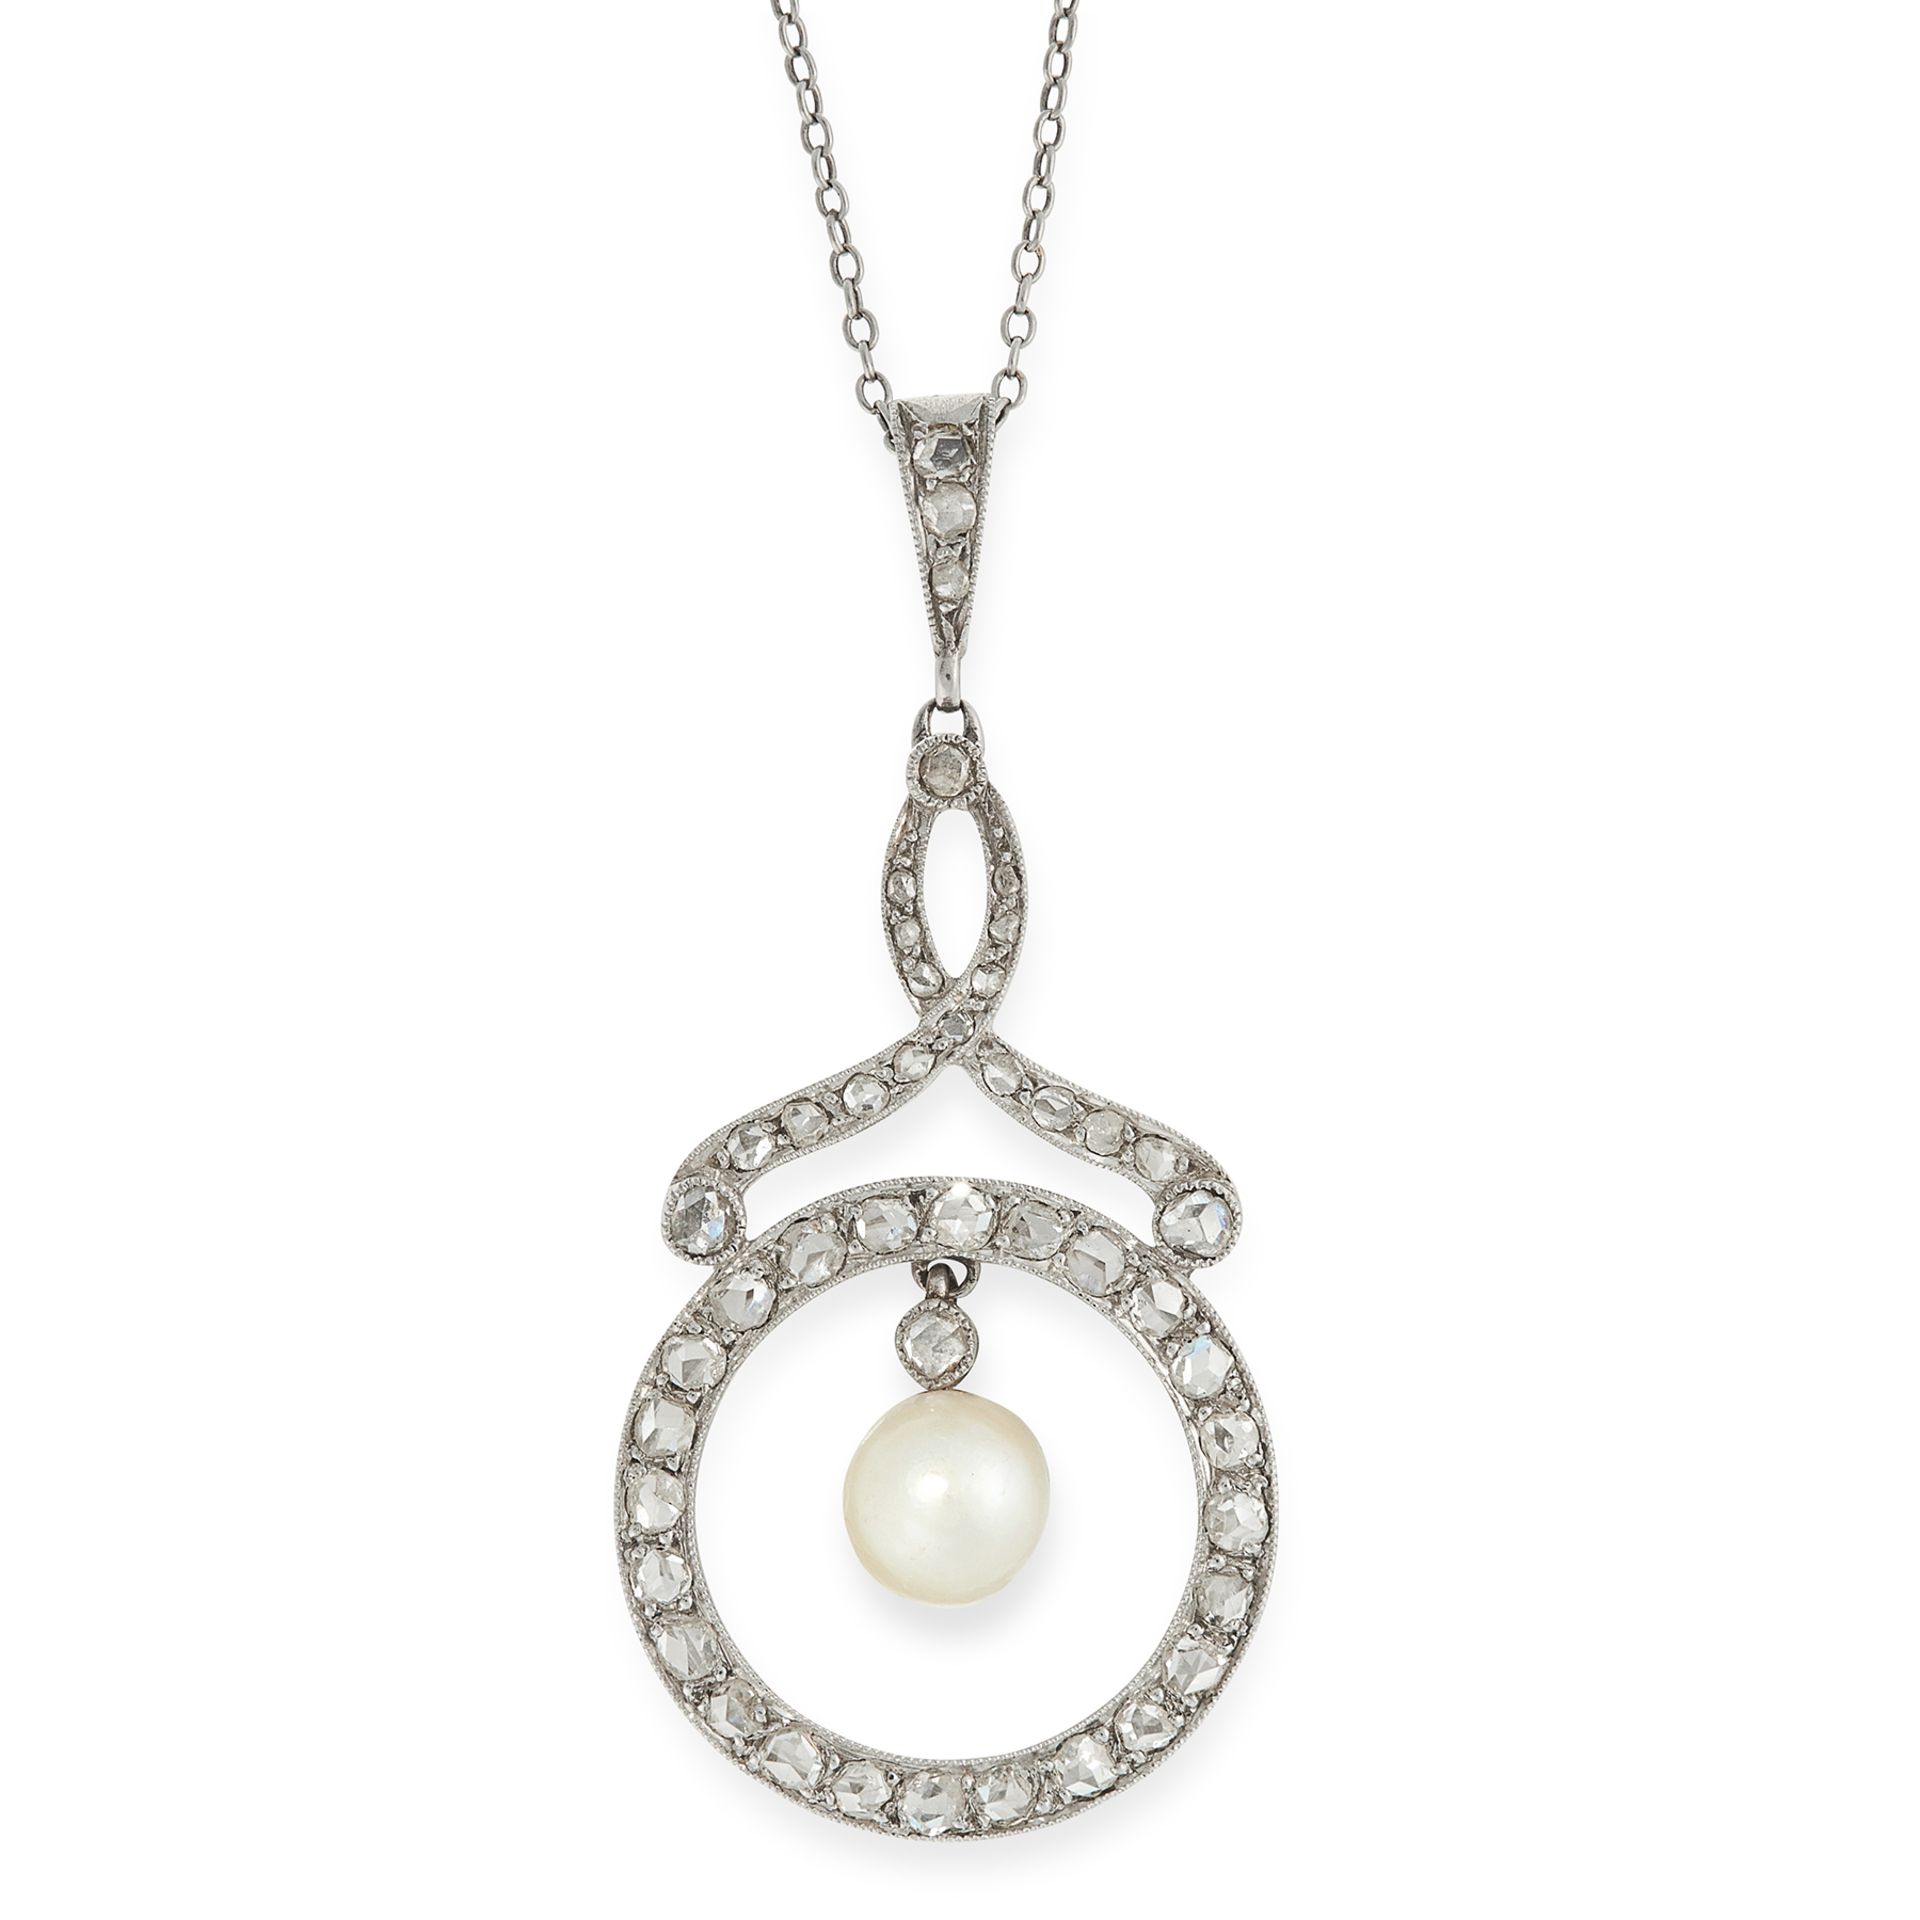 AN ANTIQUE PEARL AND DIAMOND PENDANT AND CHAIN in platinum, the pendant of circular design set